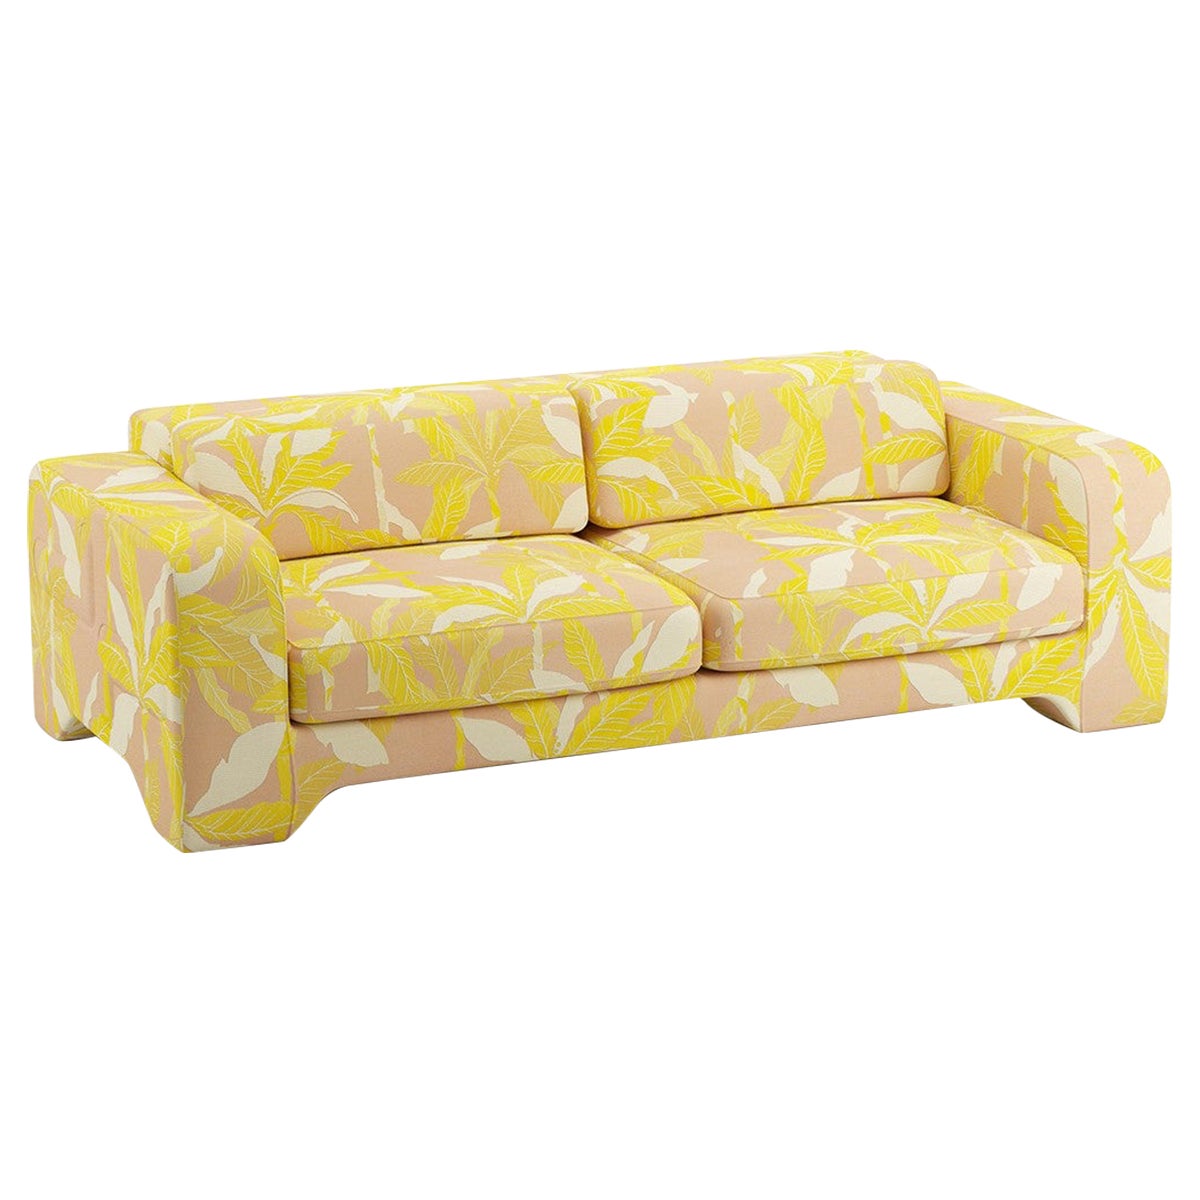 Popus Editions Giovanna 2.5 Seater Sofa in Pink Miami Jacquard Fabric For Sale